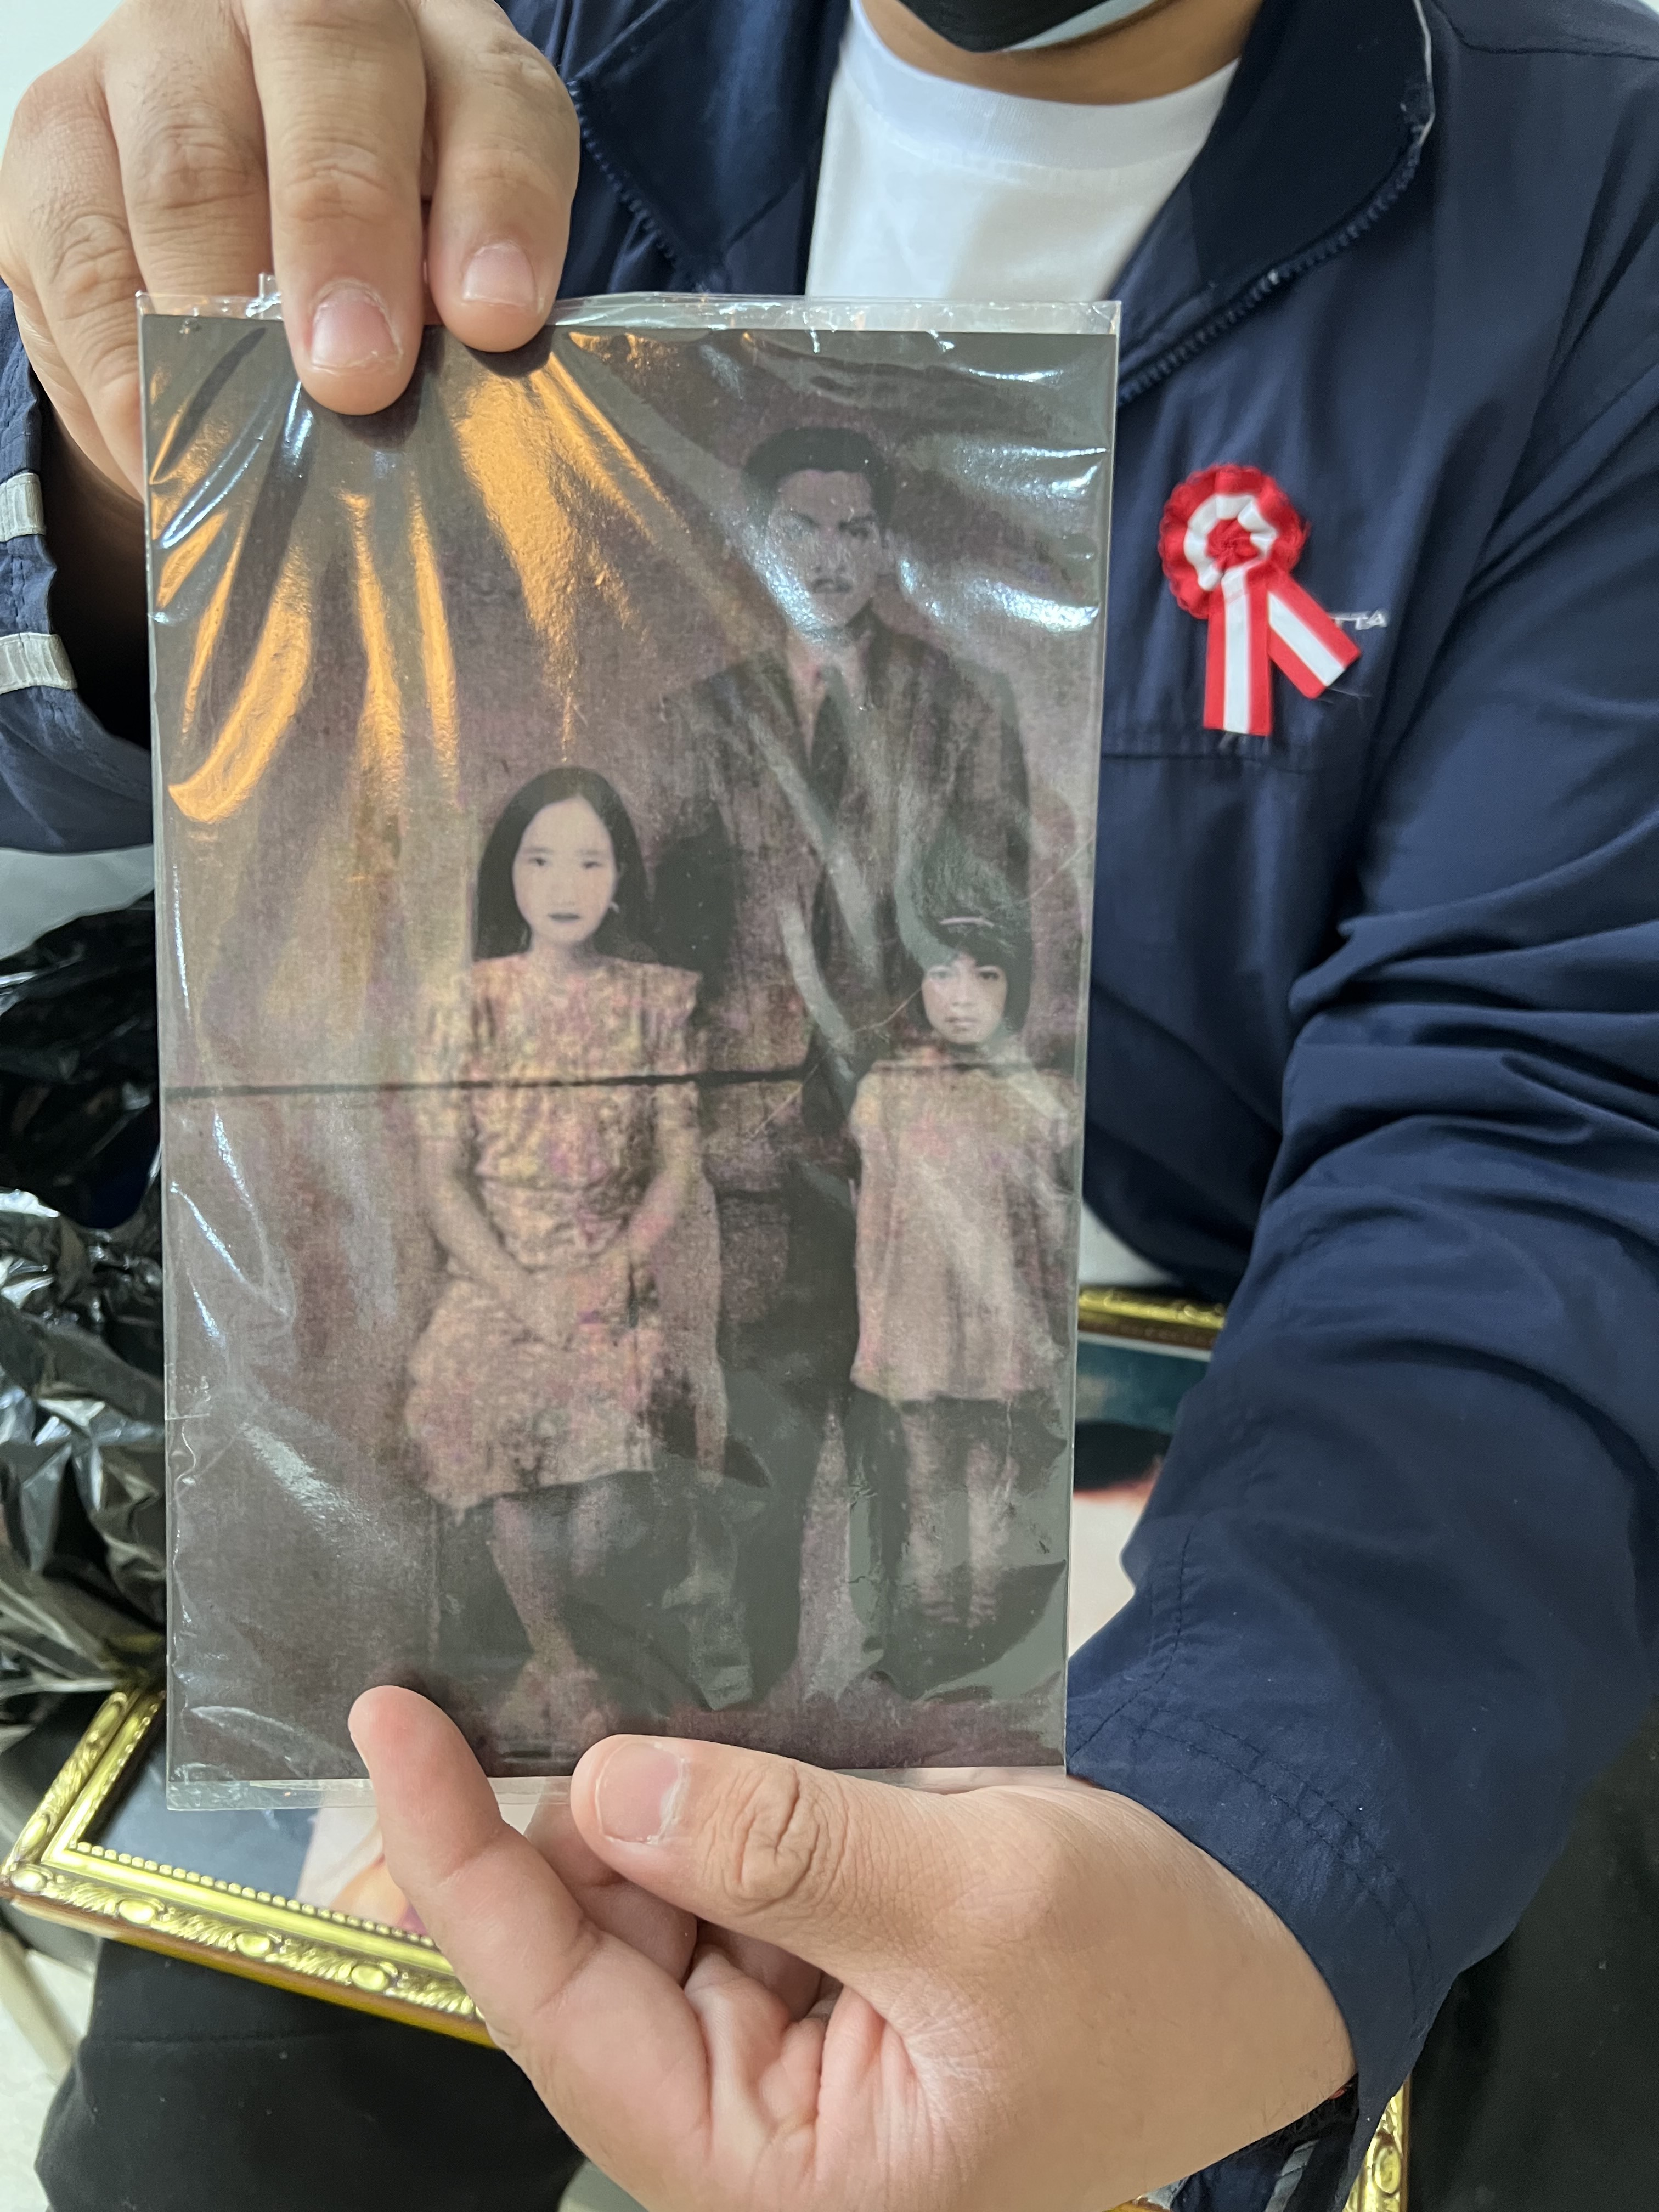 A man in a blue shirt holds up an old photograph of a man, woman, and child